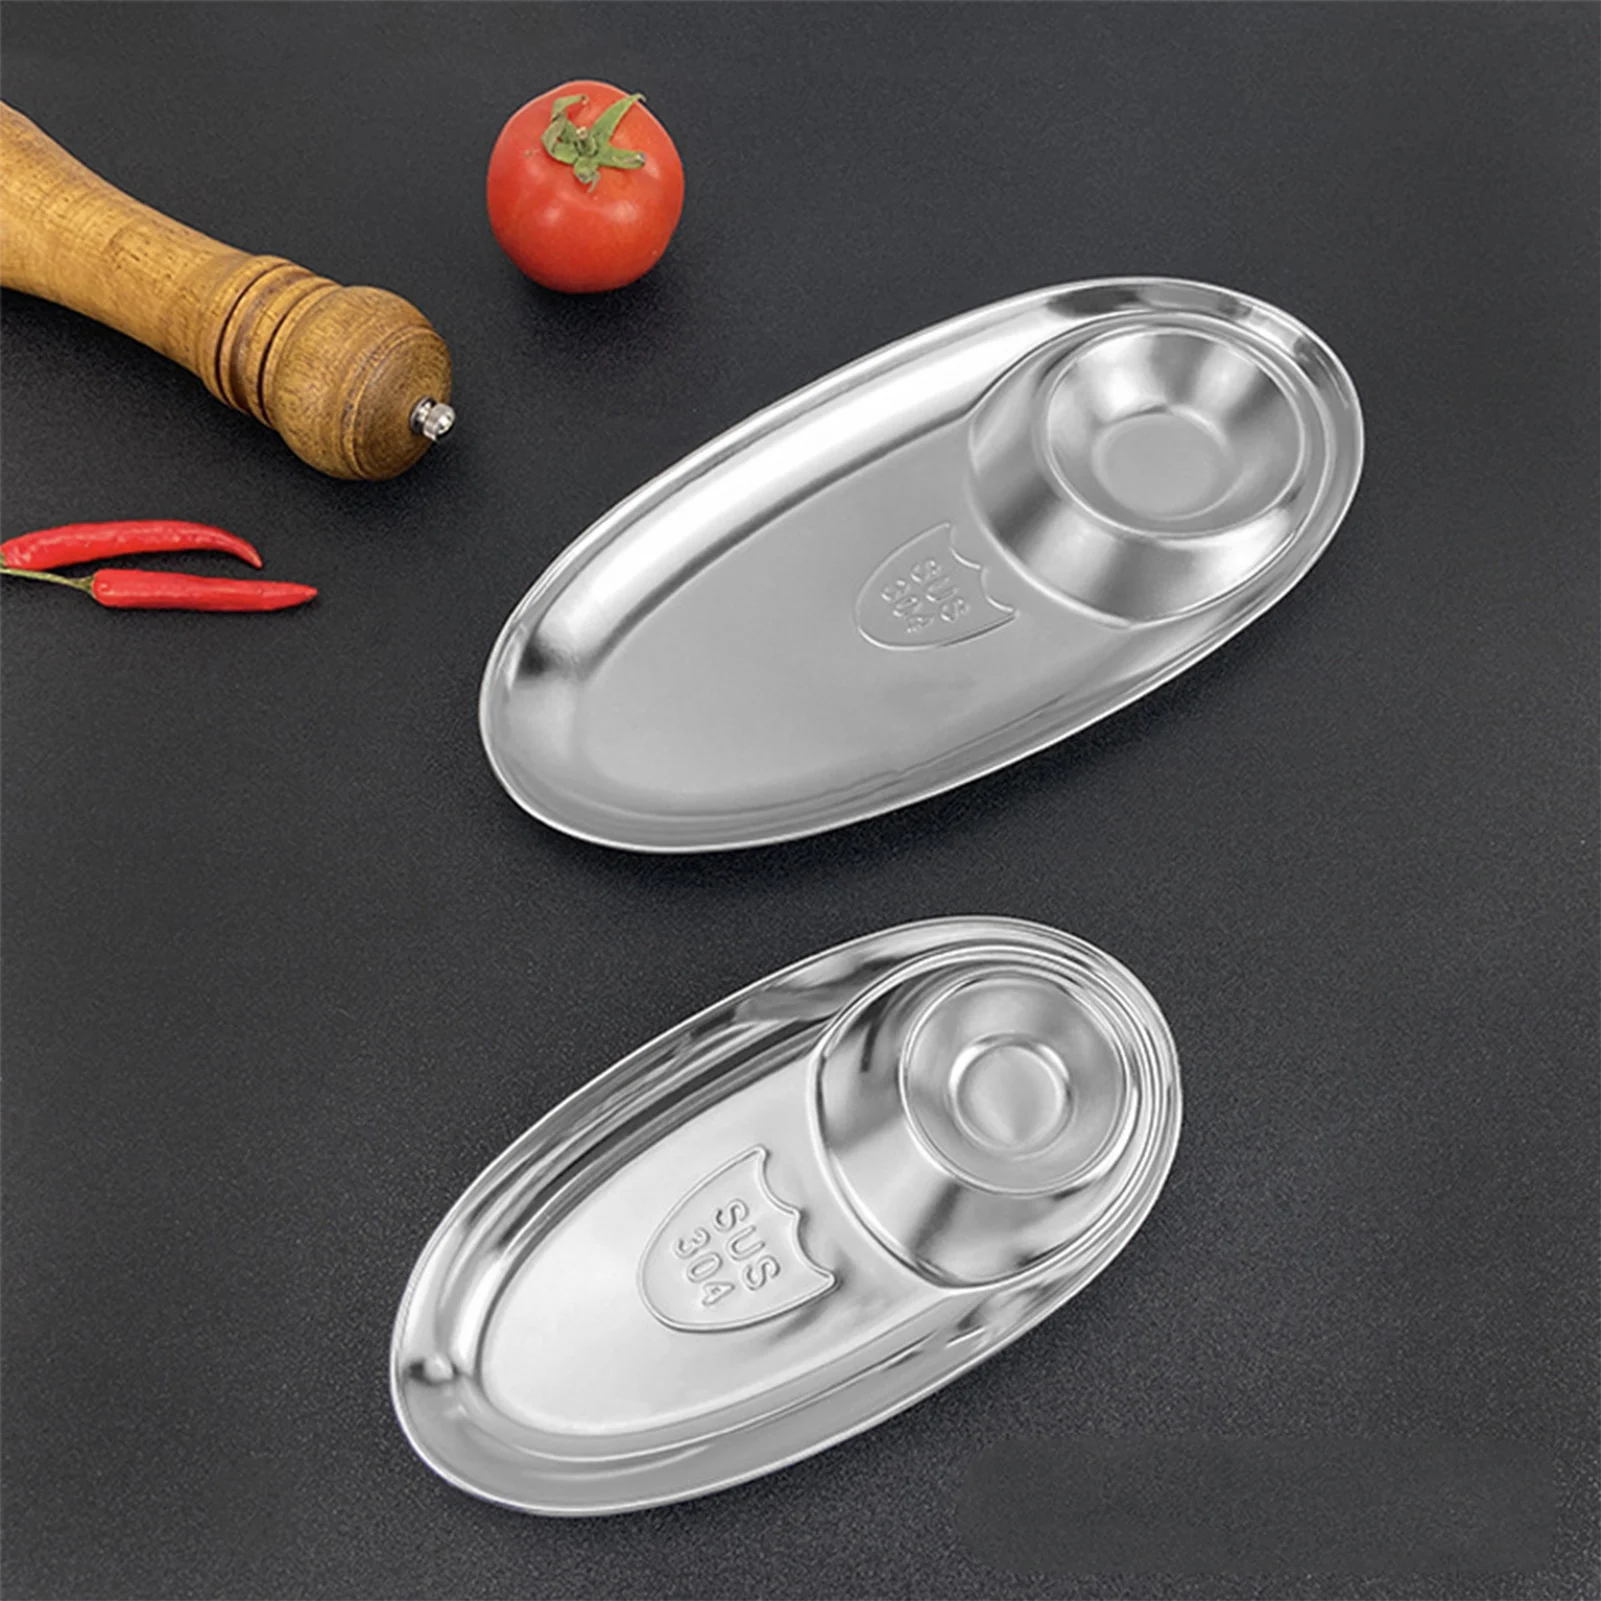 

304 Stainless Steel Divided Plate Oval 2-Section Snack Serving Sauce Dish Plates Western Fried Chicken Fries Supplies Tableware